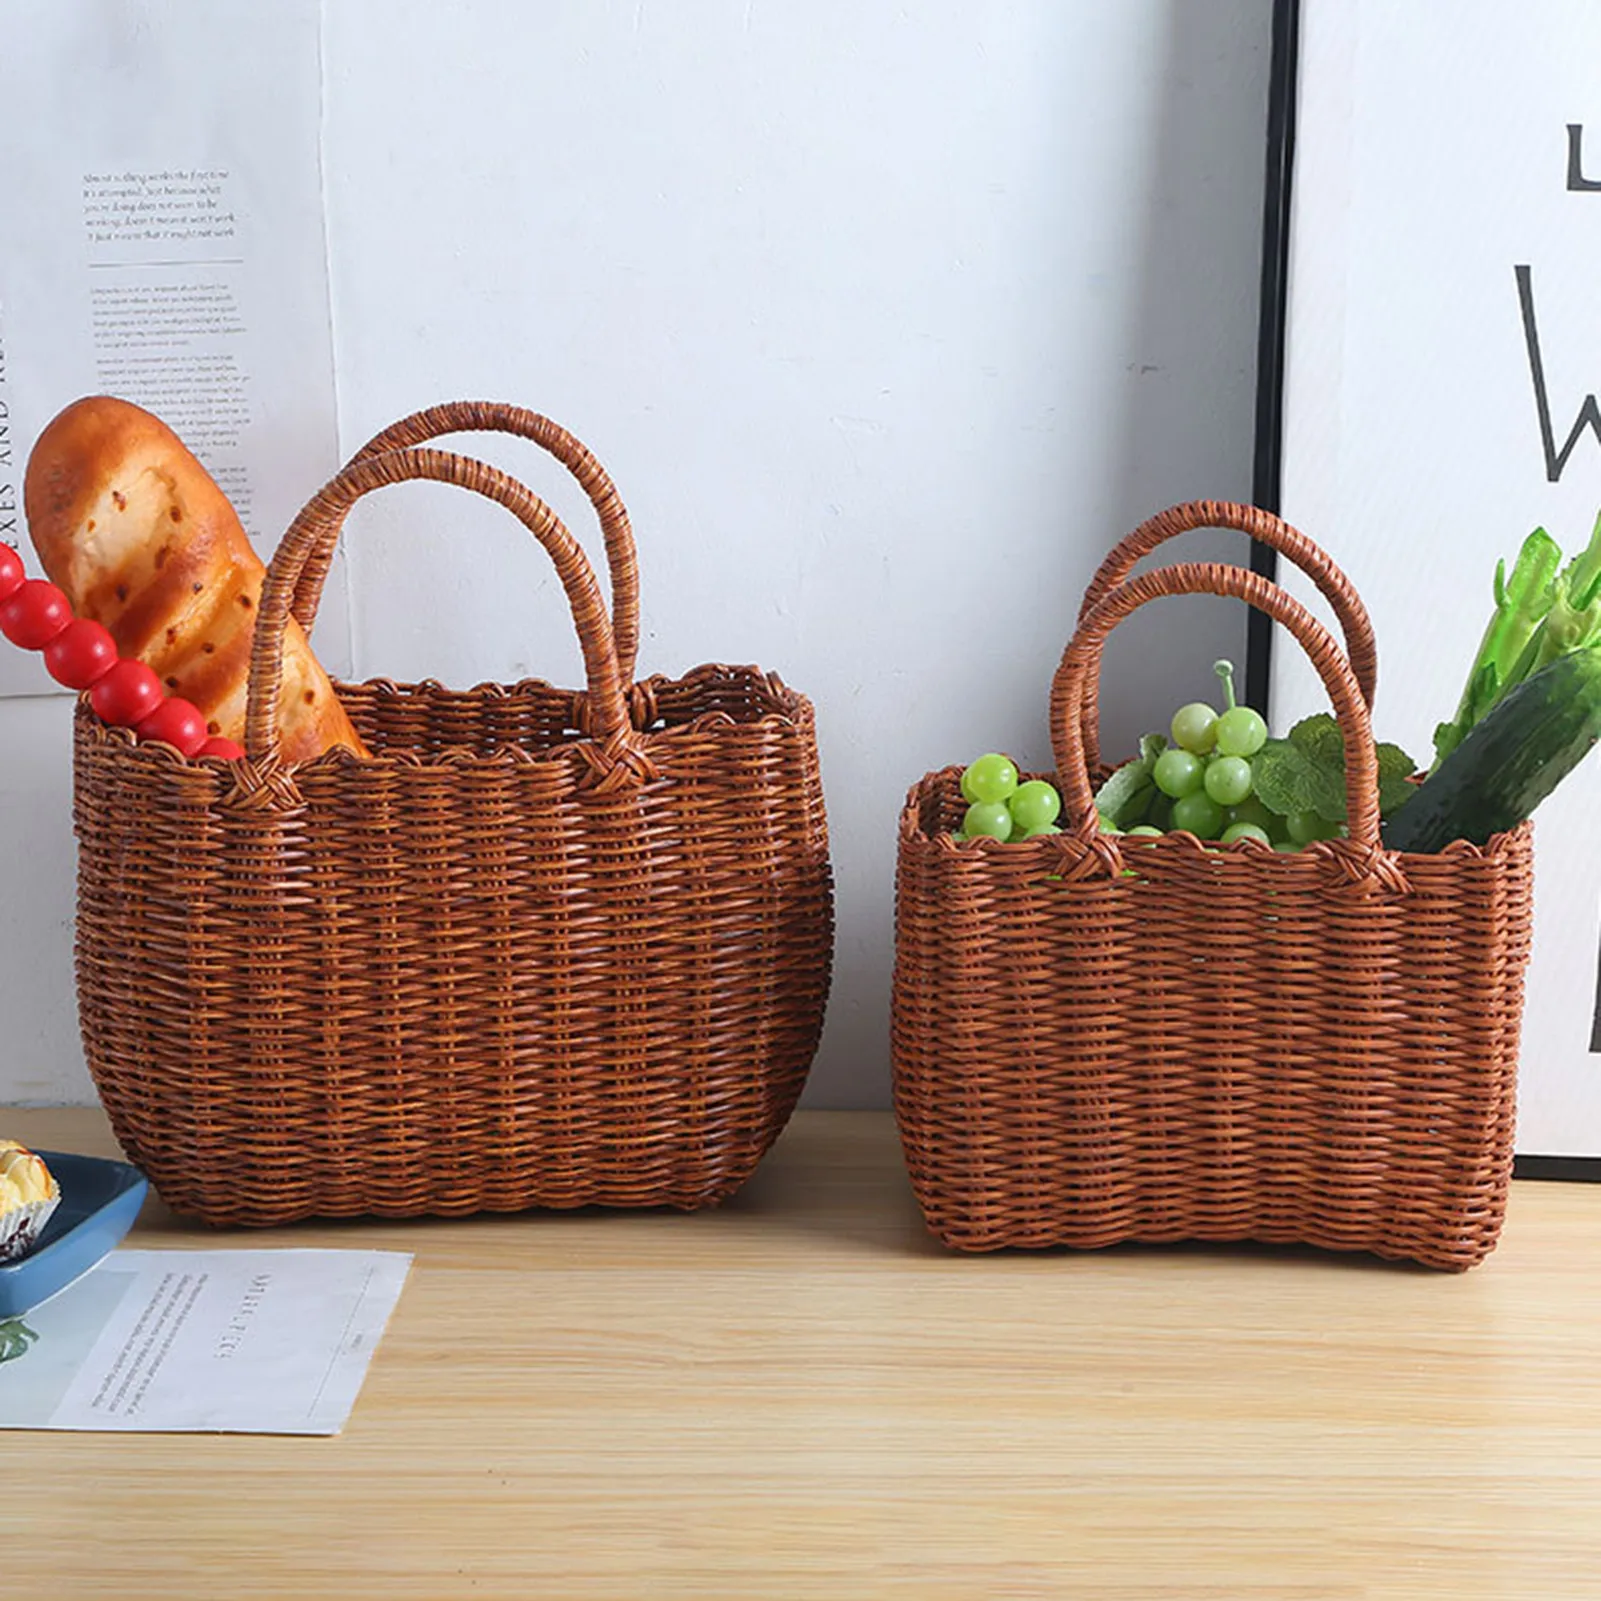 Plastic Woven Portable Grocery Shopping Storage Basket Handmade Camping Picnic Basket with Handle Portable Woven Market Grocery Basket 